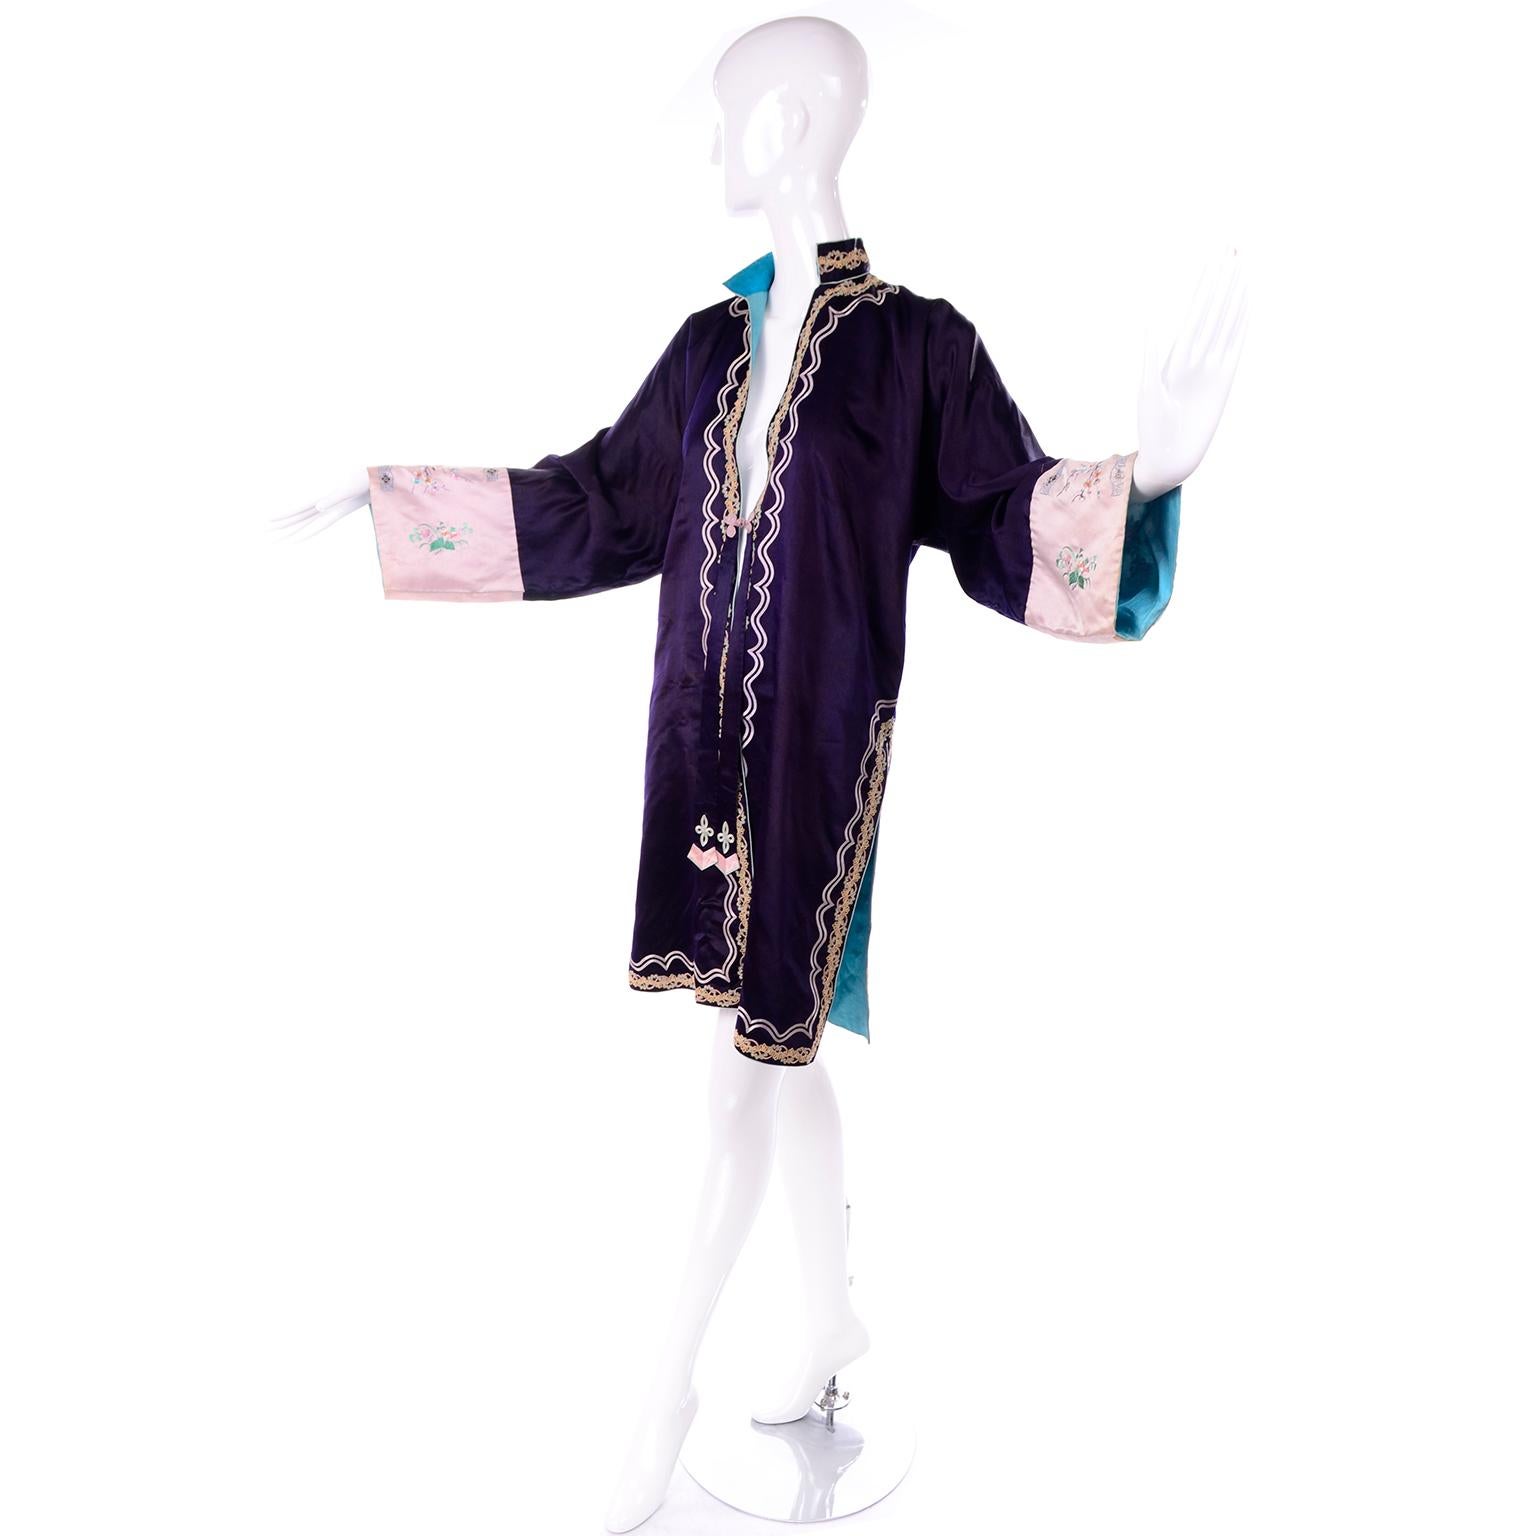 This is a lovely vintage purple silk Chinese jacket with beautiful ribbon & soutache trim with exquisite embroidery. The jacket has center single silk knot closure and lovely aqua blue lining. There are two panels of fabric that start near the